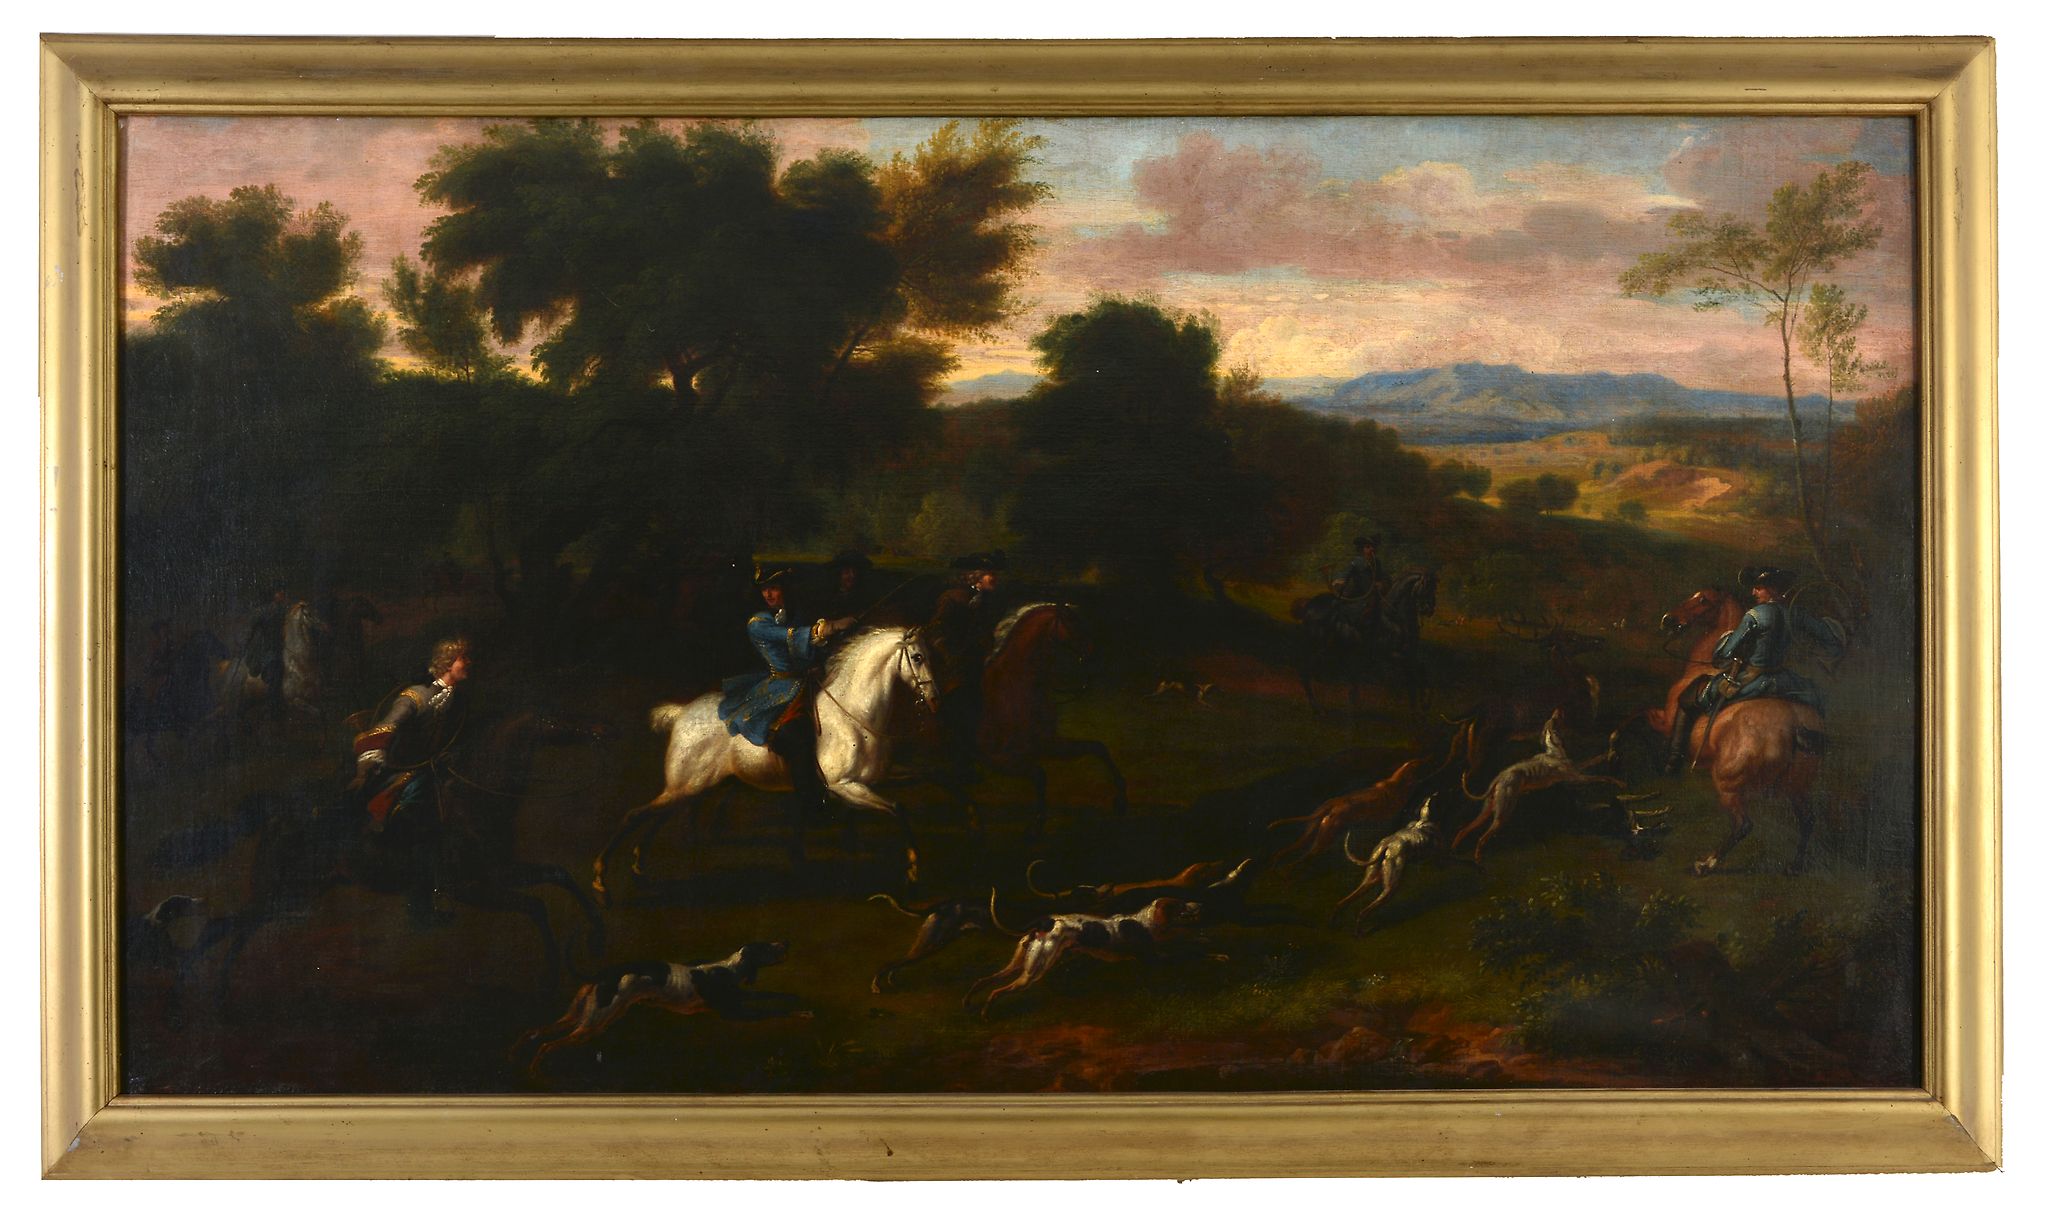 Attributed to Jan Wyck (1640-1700) - A Royal Hunt, traditionally understood to show William III - Image 2 of 3